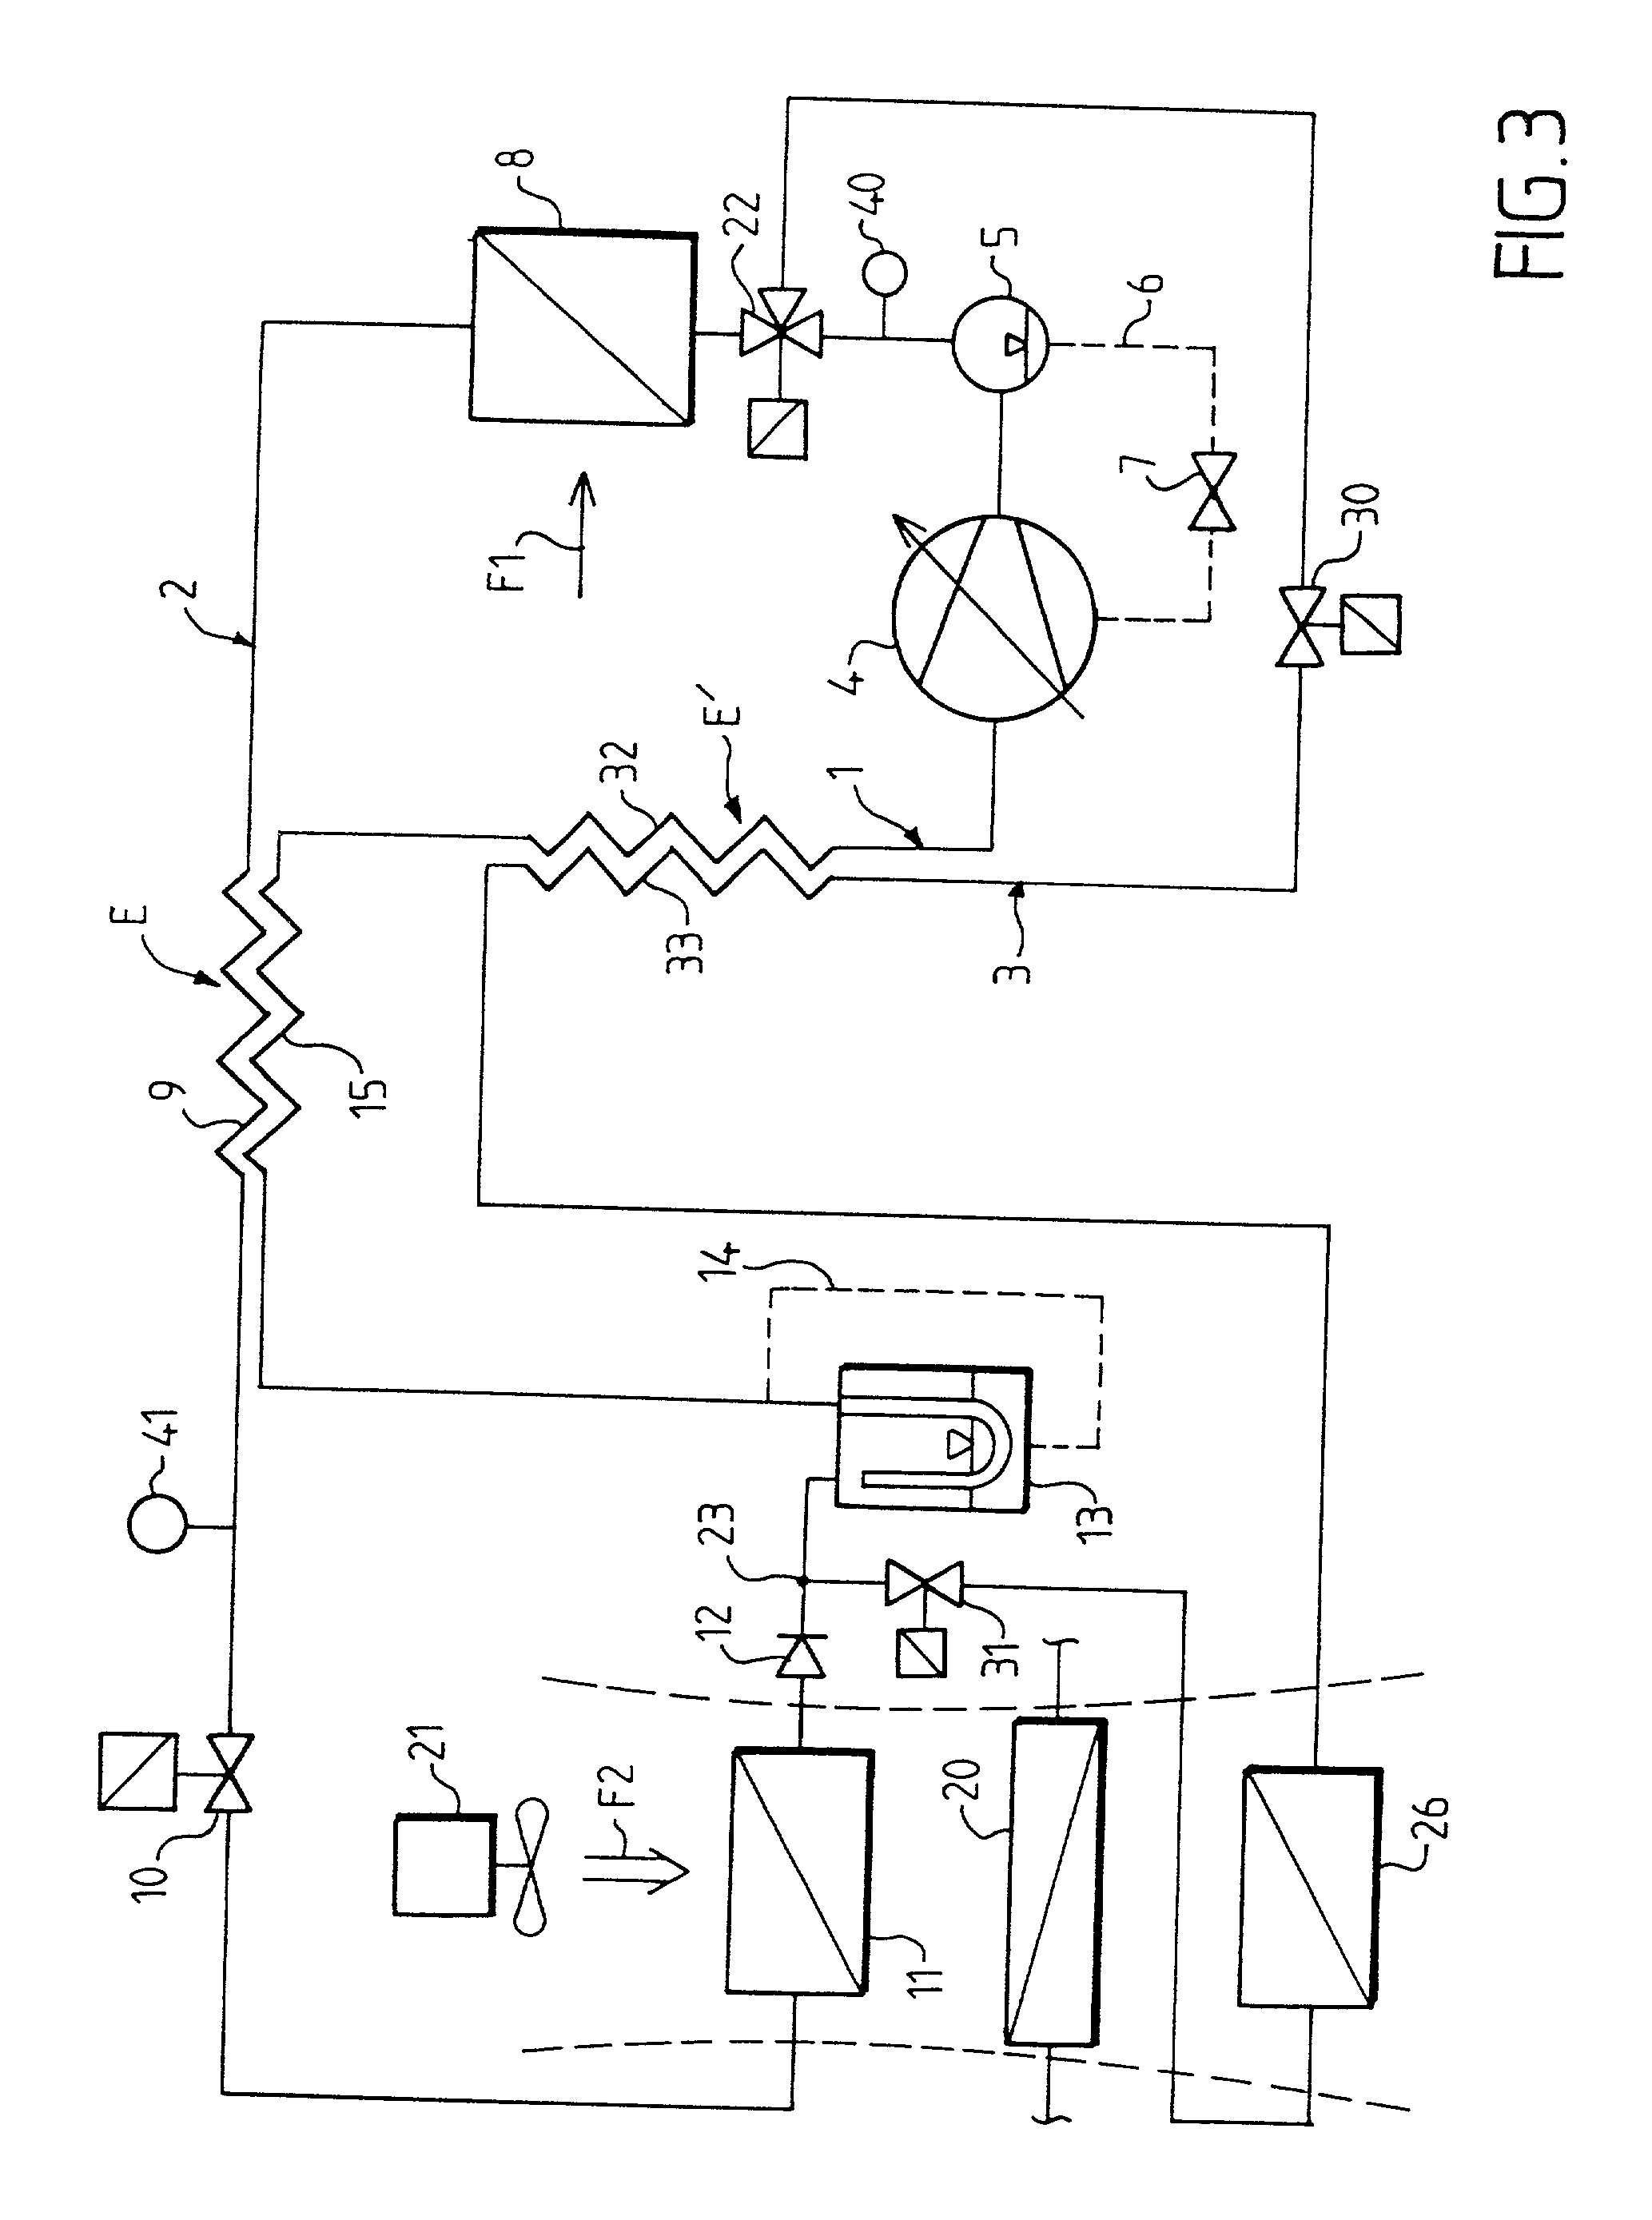 Vehicle air conditioning circuit using a refrigerant fluid in the supercritical state